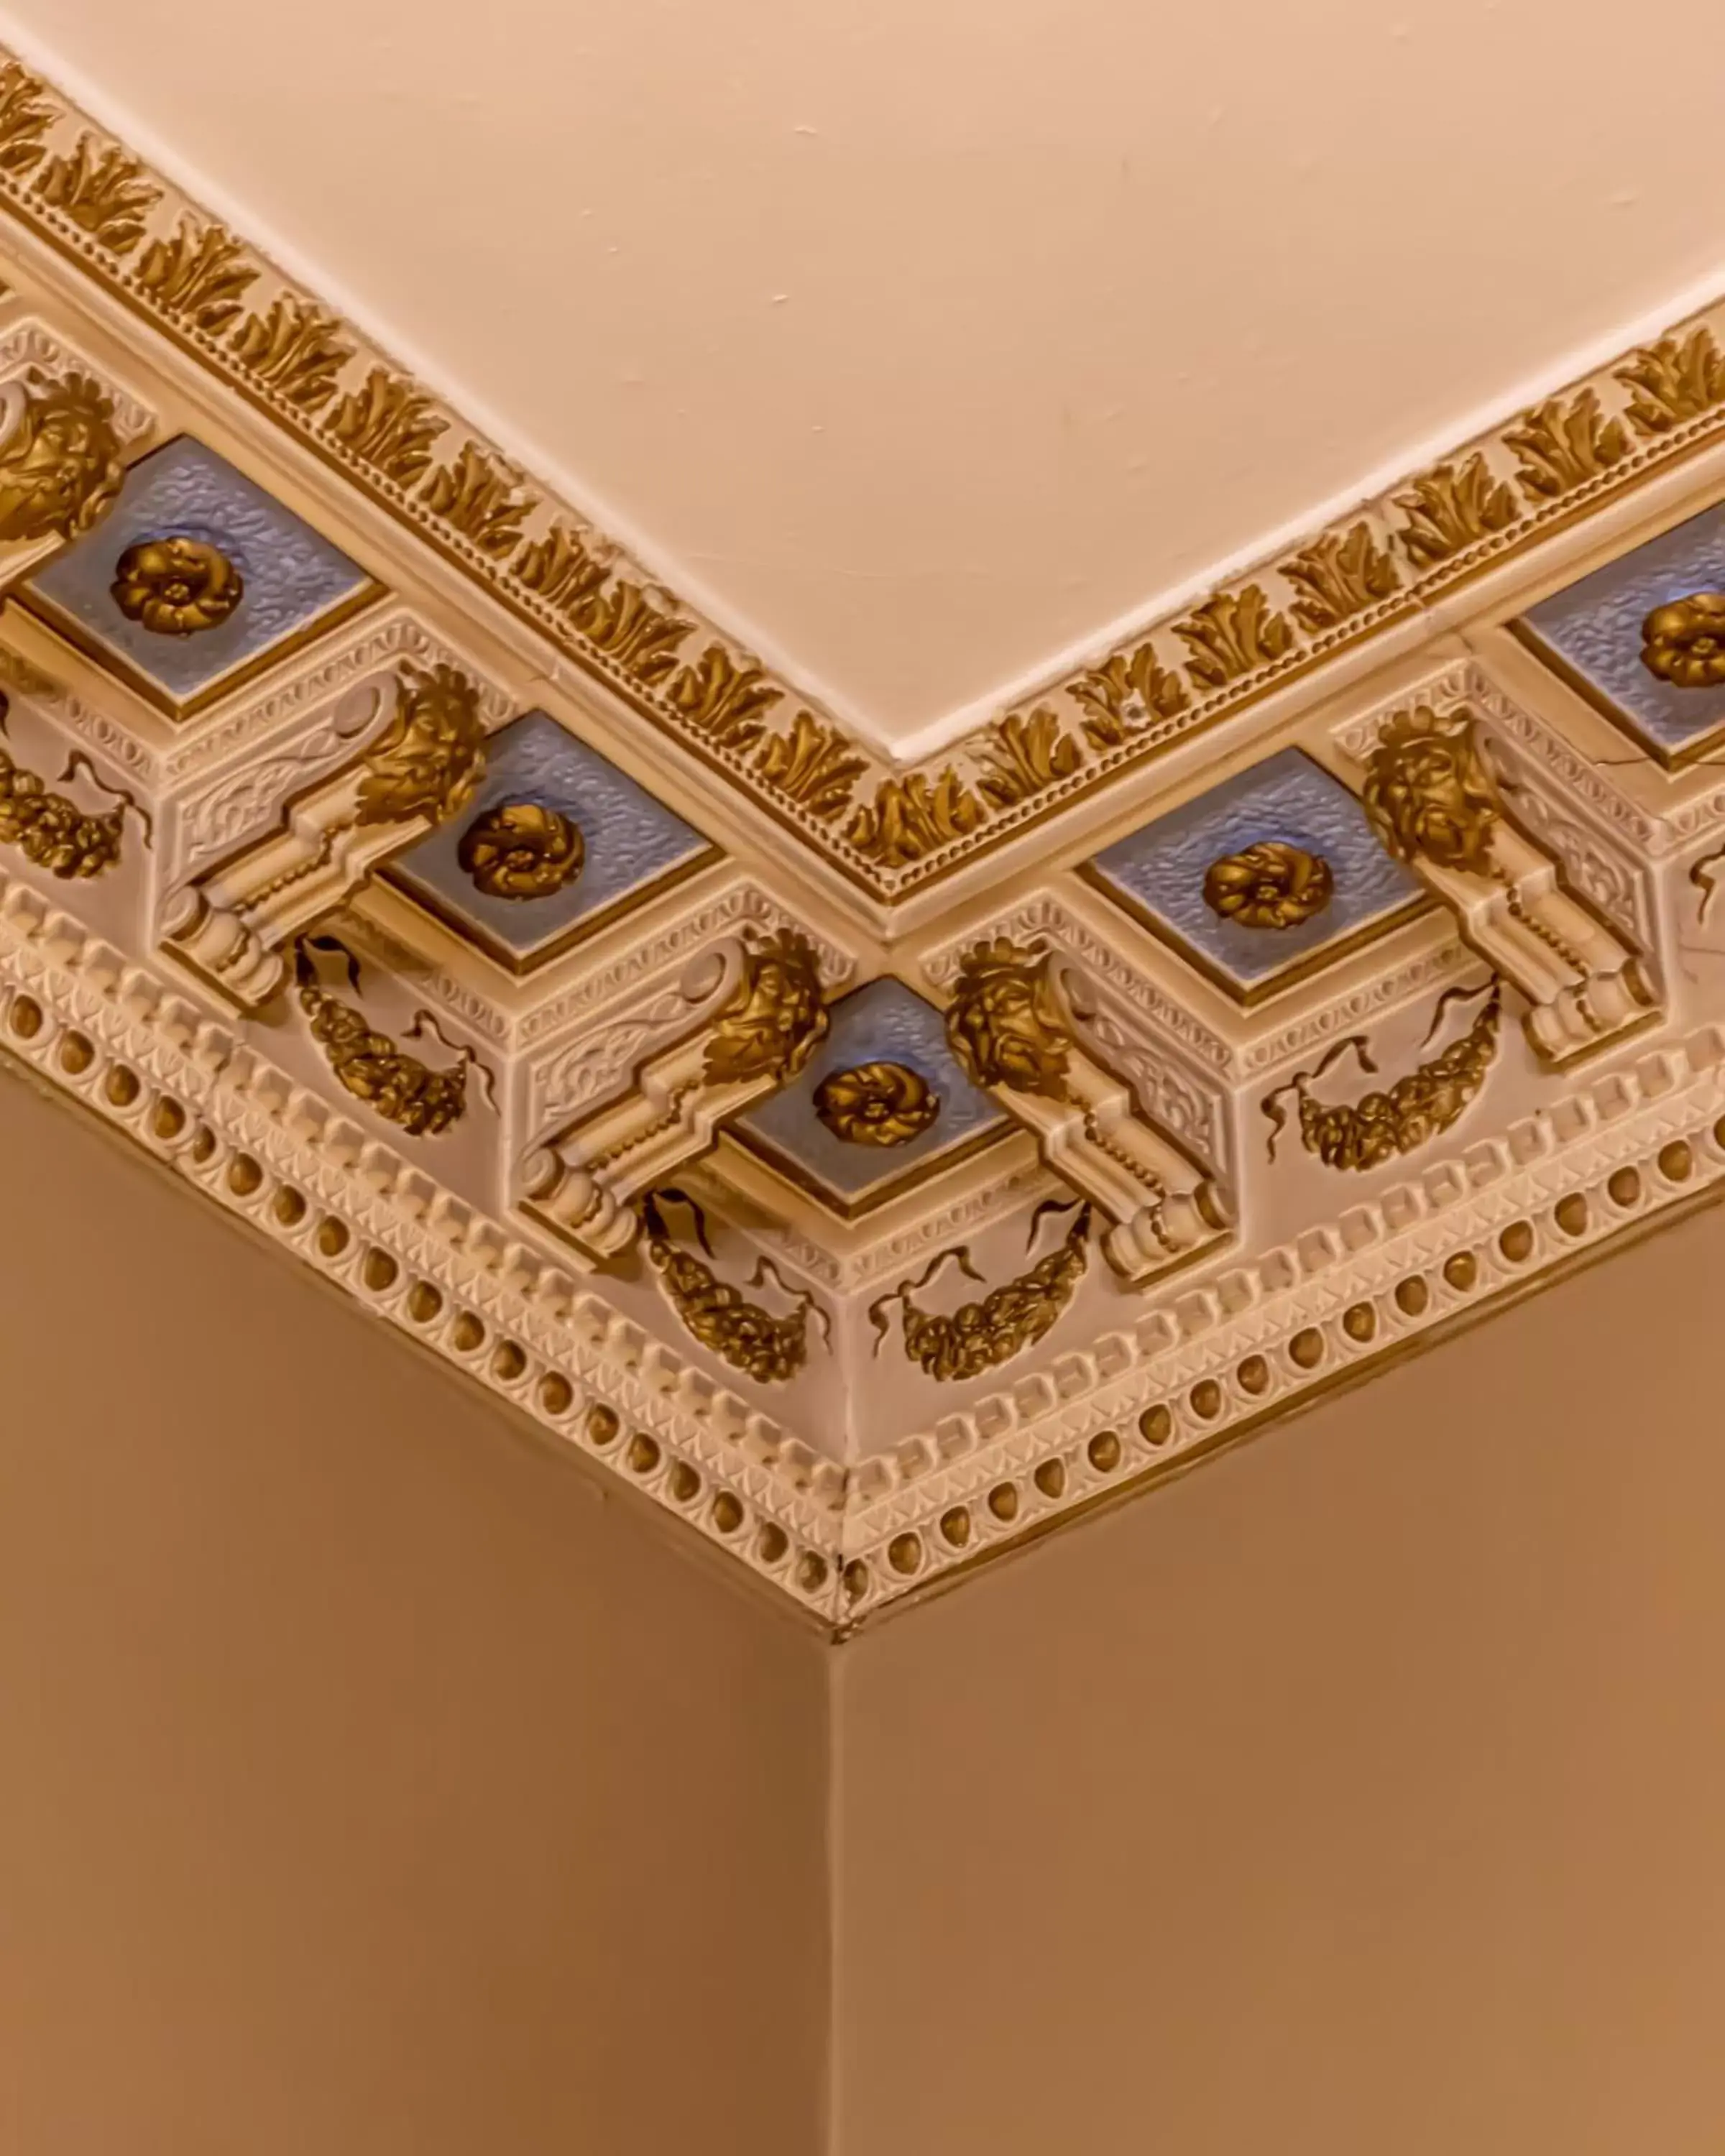 Decorative detail in First Hotel Christian IV